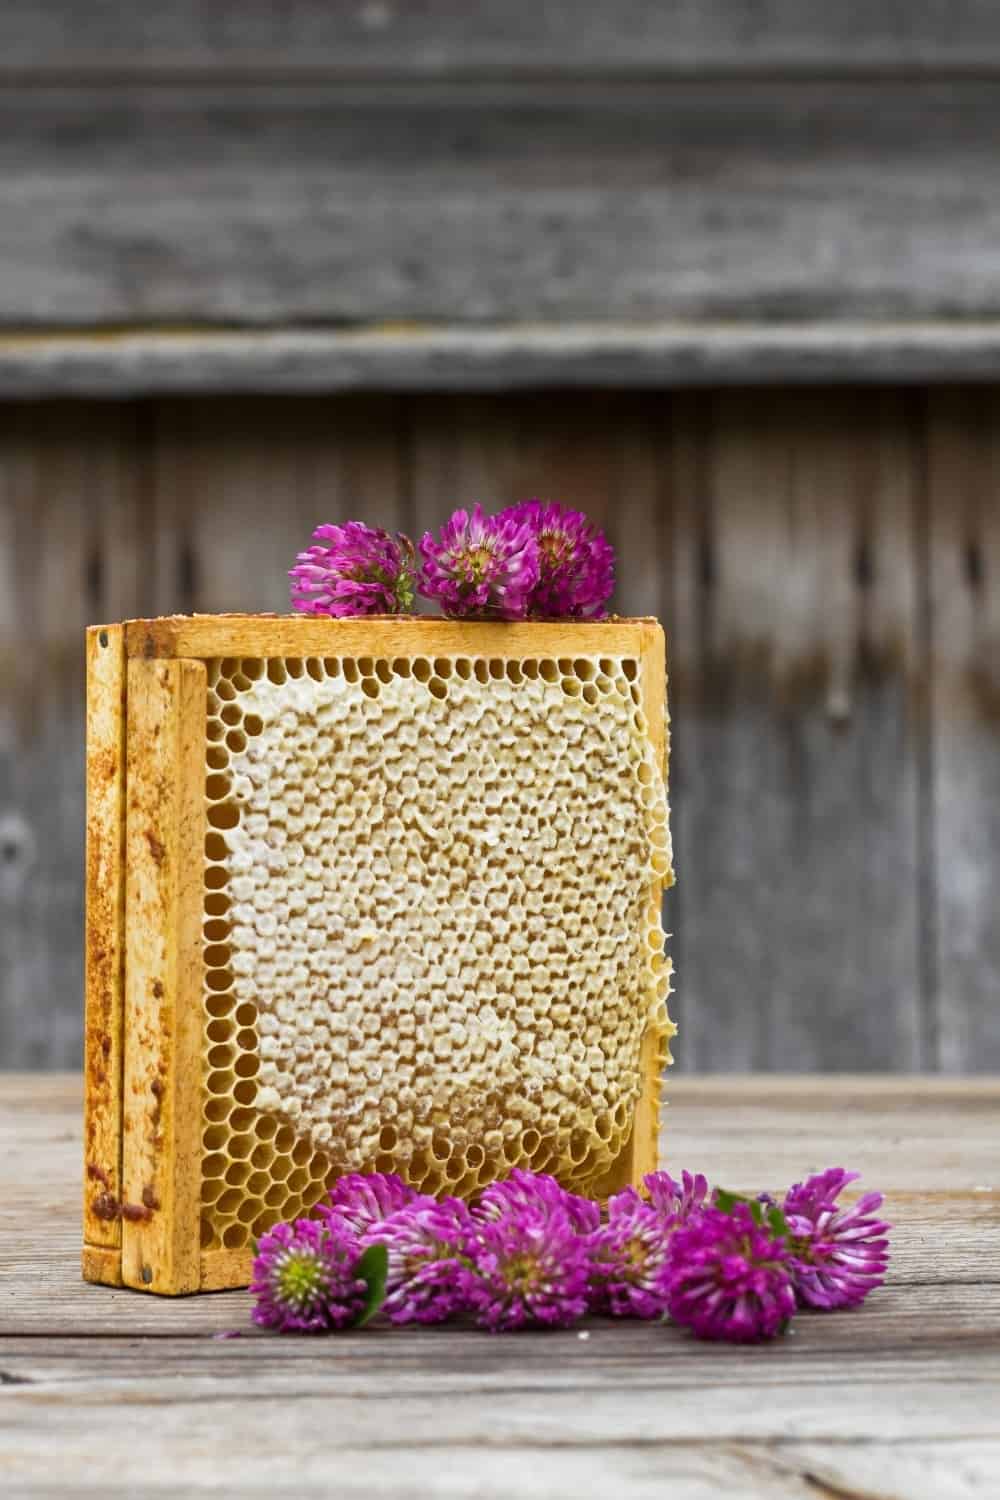 honeycomb and clover flowers